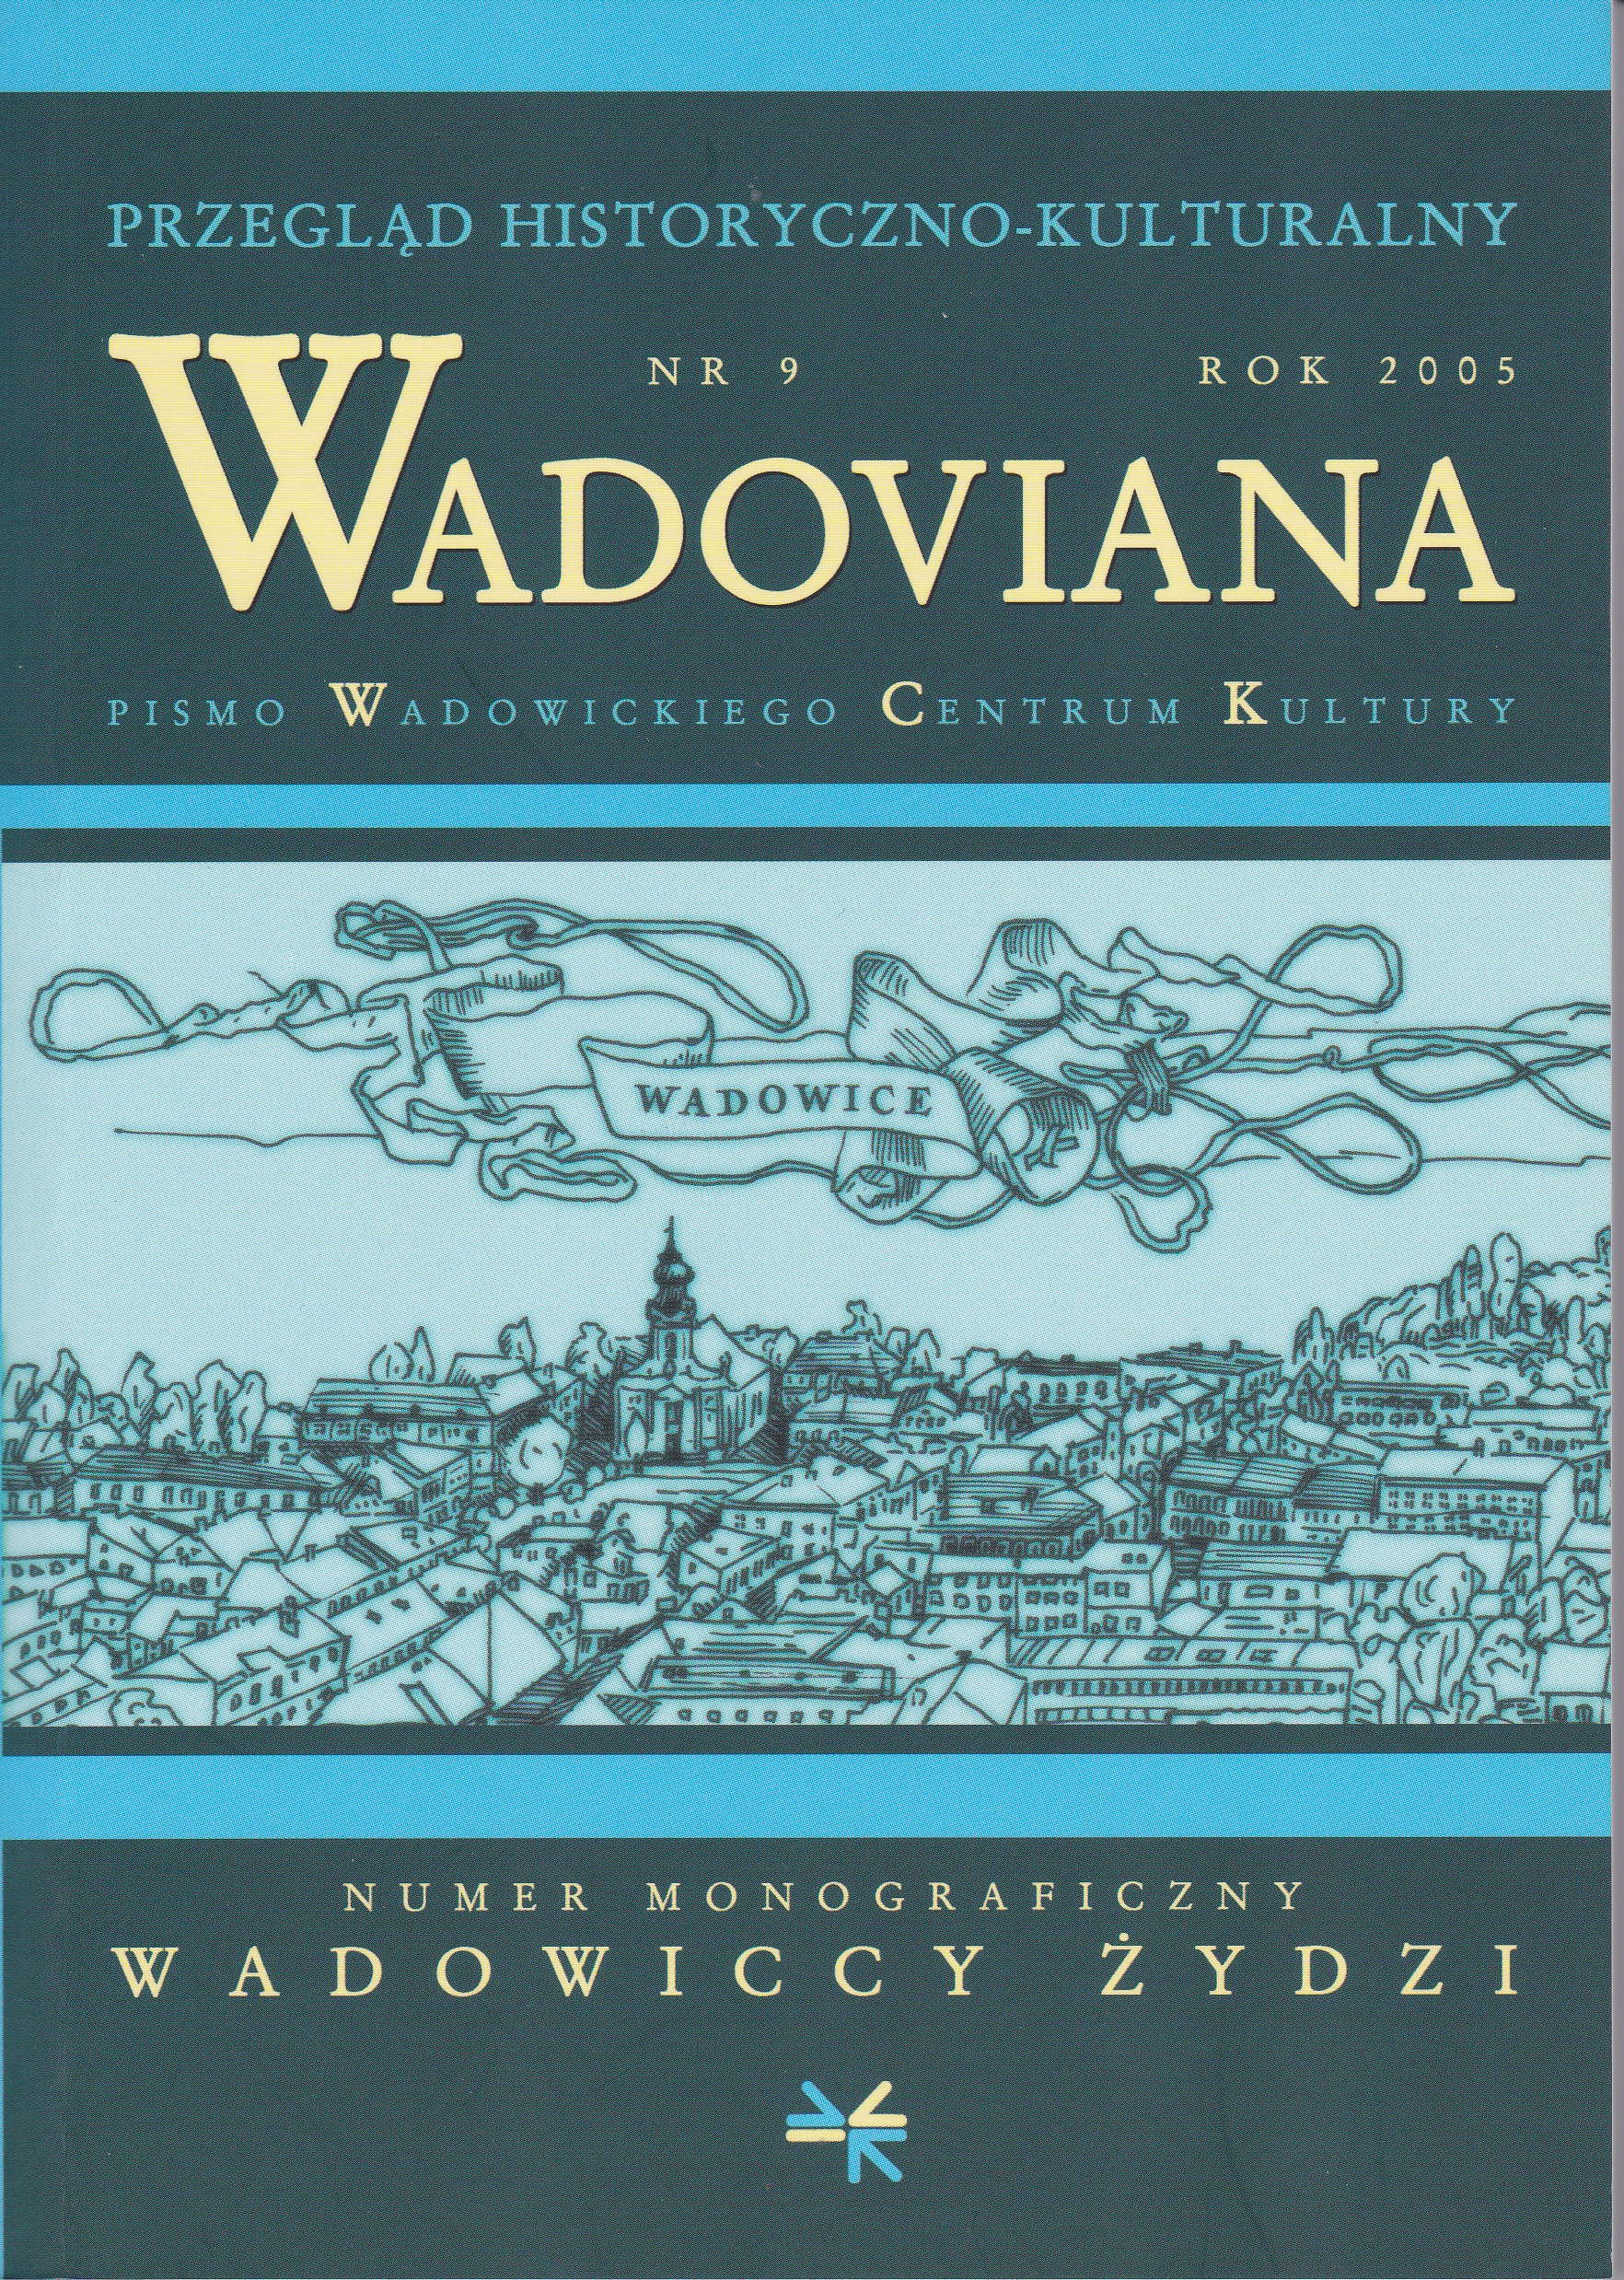 Social and cultural life of Wadowice Jews in the interwar period Cover Image